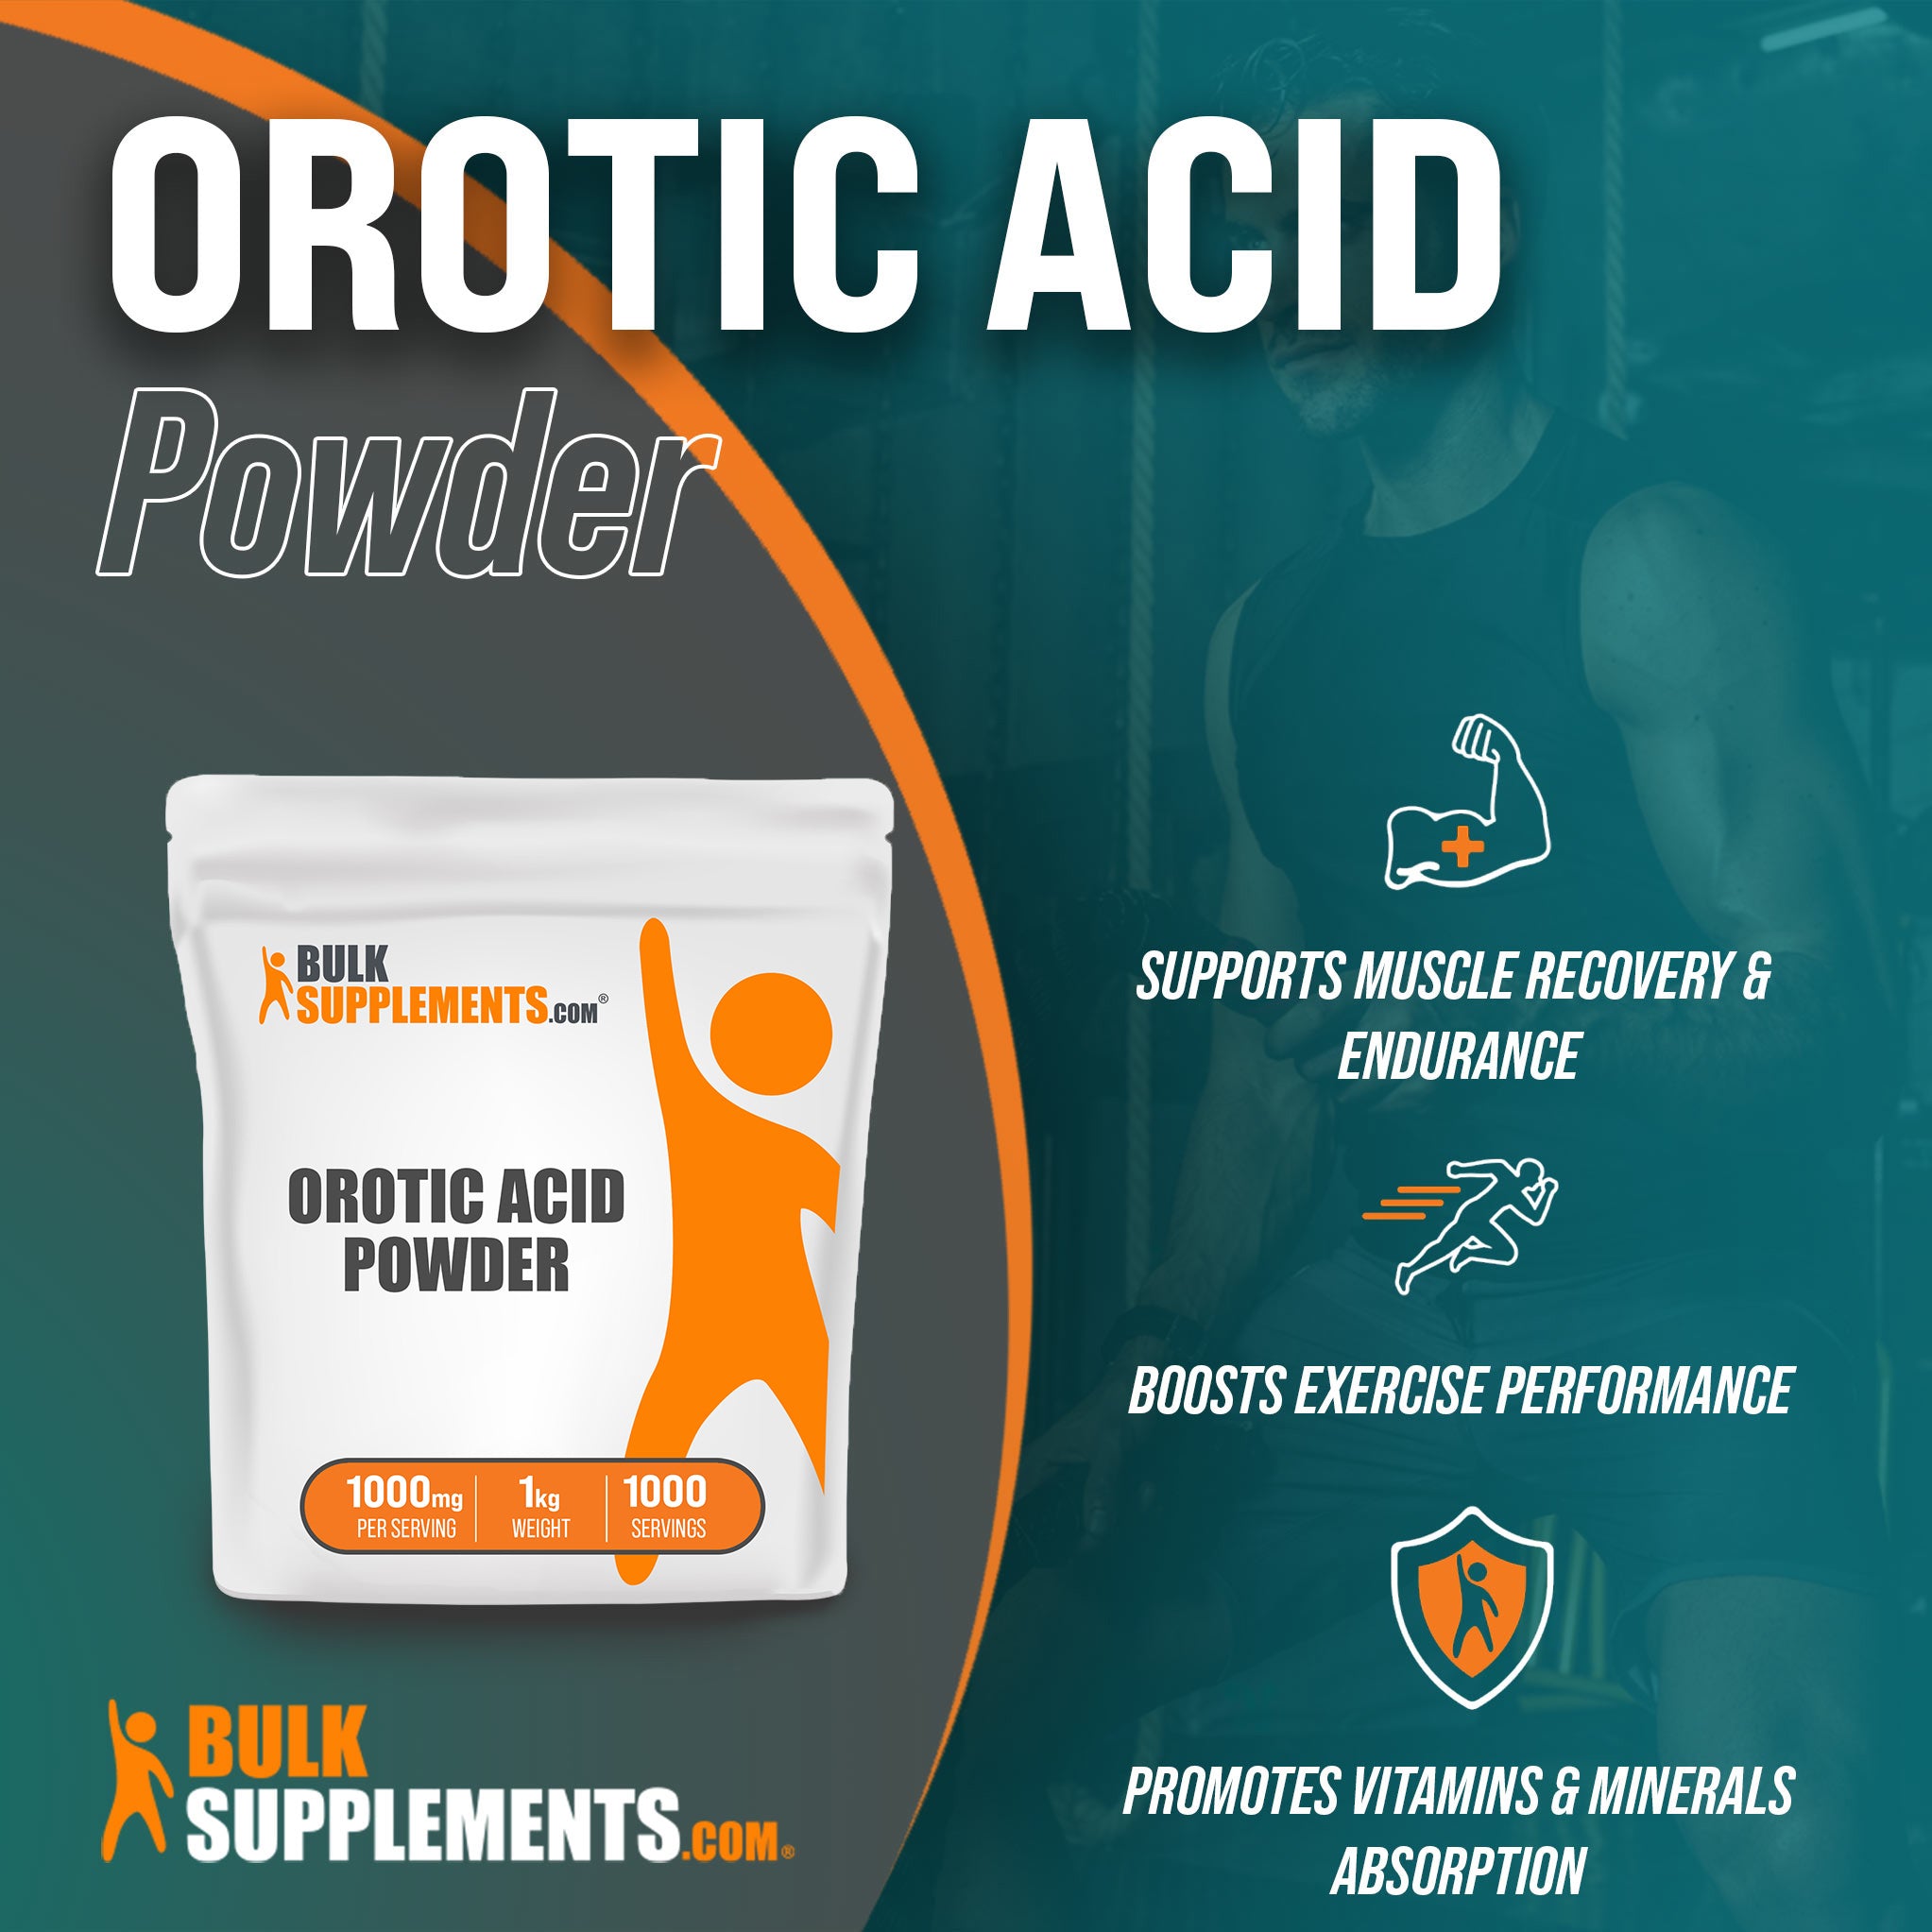 Benefits of Orotic Acid: supports muscle recovery and endurance, boosts exercise performance, promotes vitamins and minerals absorption